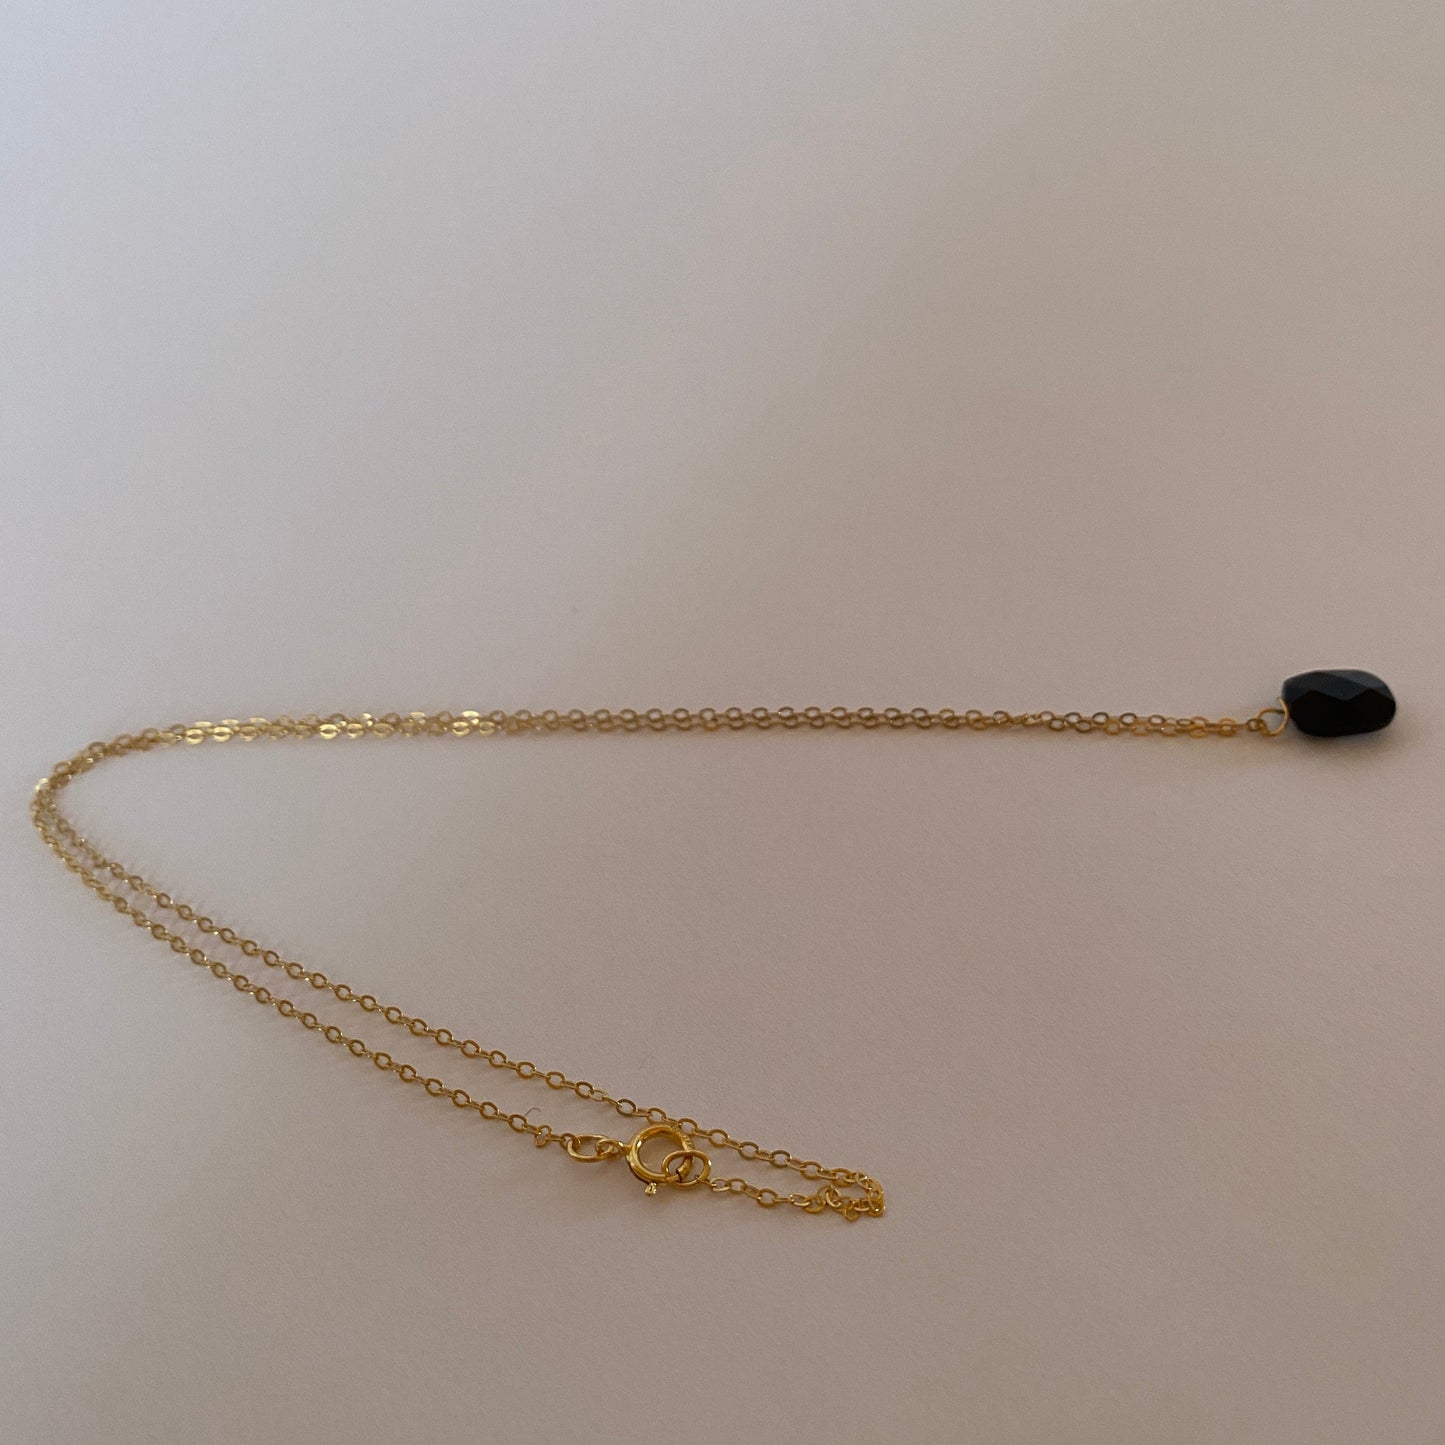 DN Dainty Chain Black Rounded Square